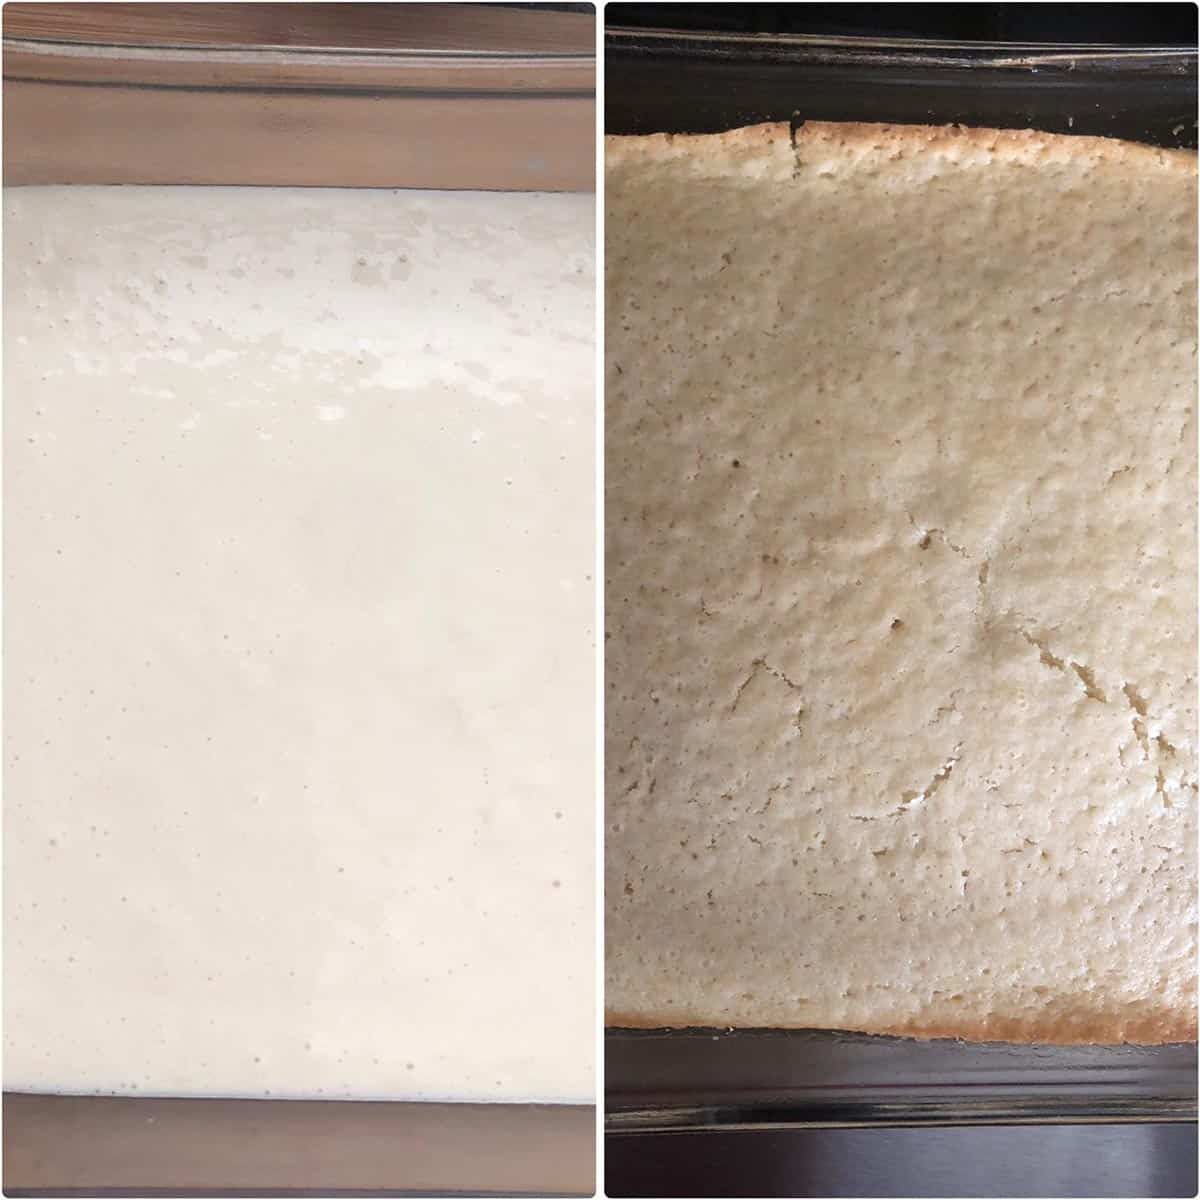 Batter poured into a square baking pan and baked until done.